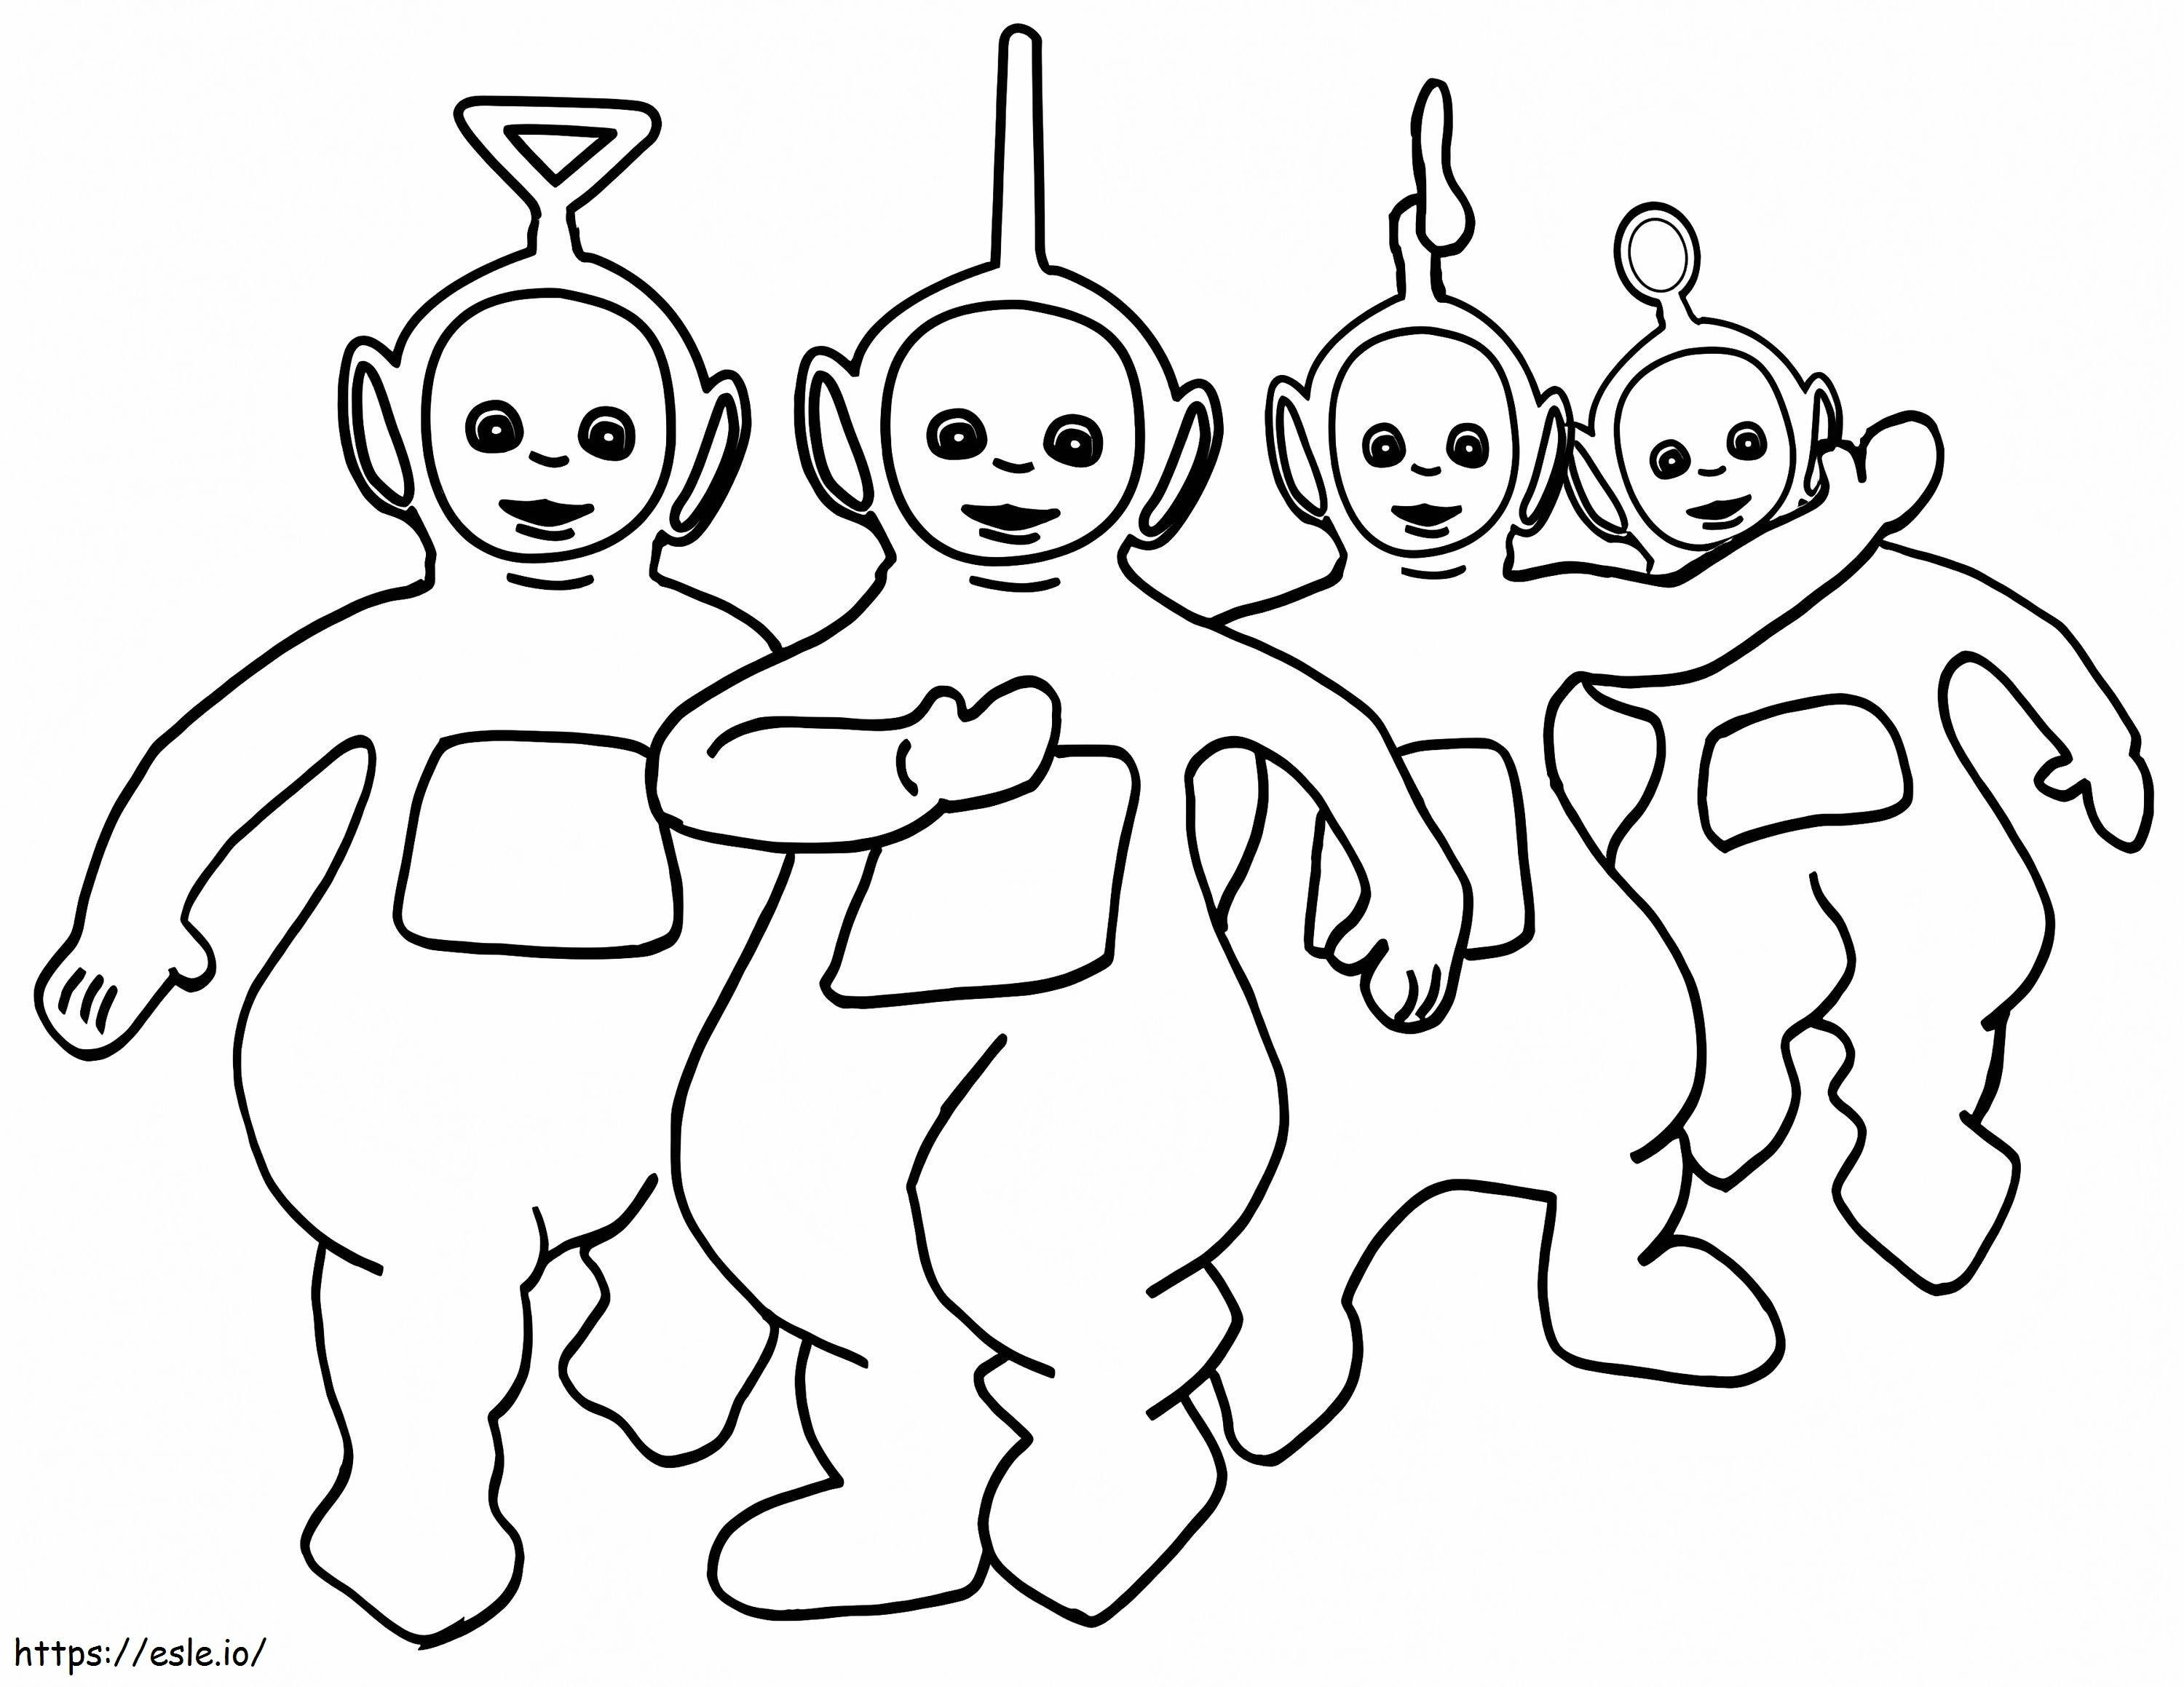 Funny Teletubbies Coloring Page coloring page